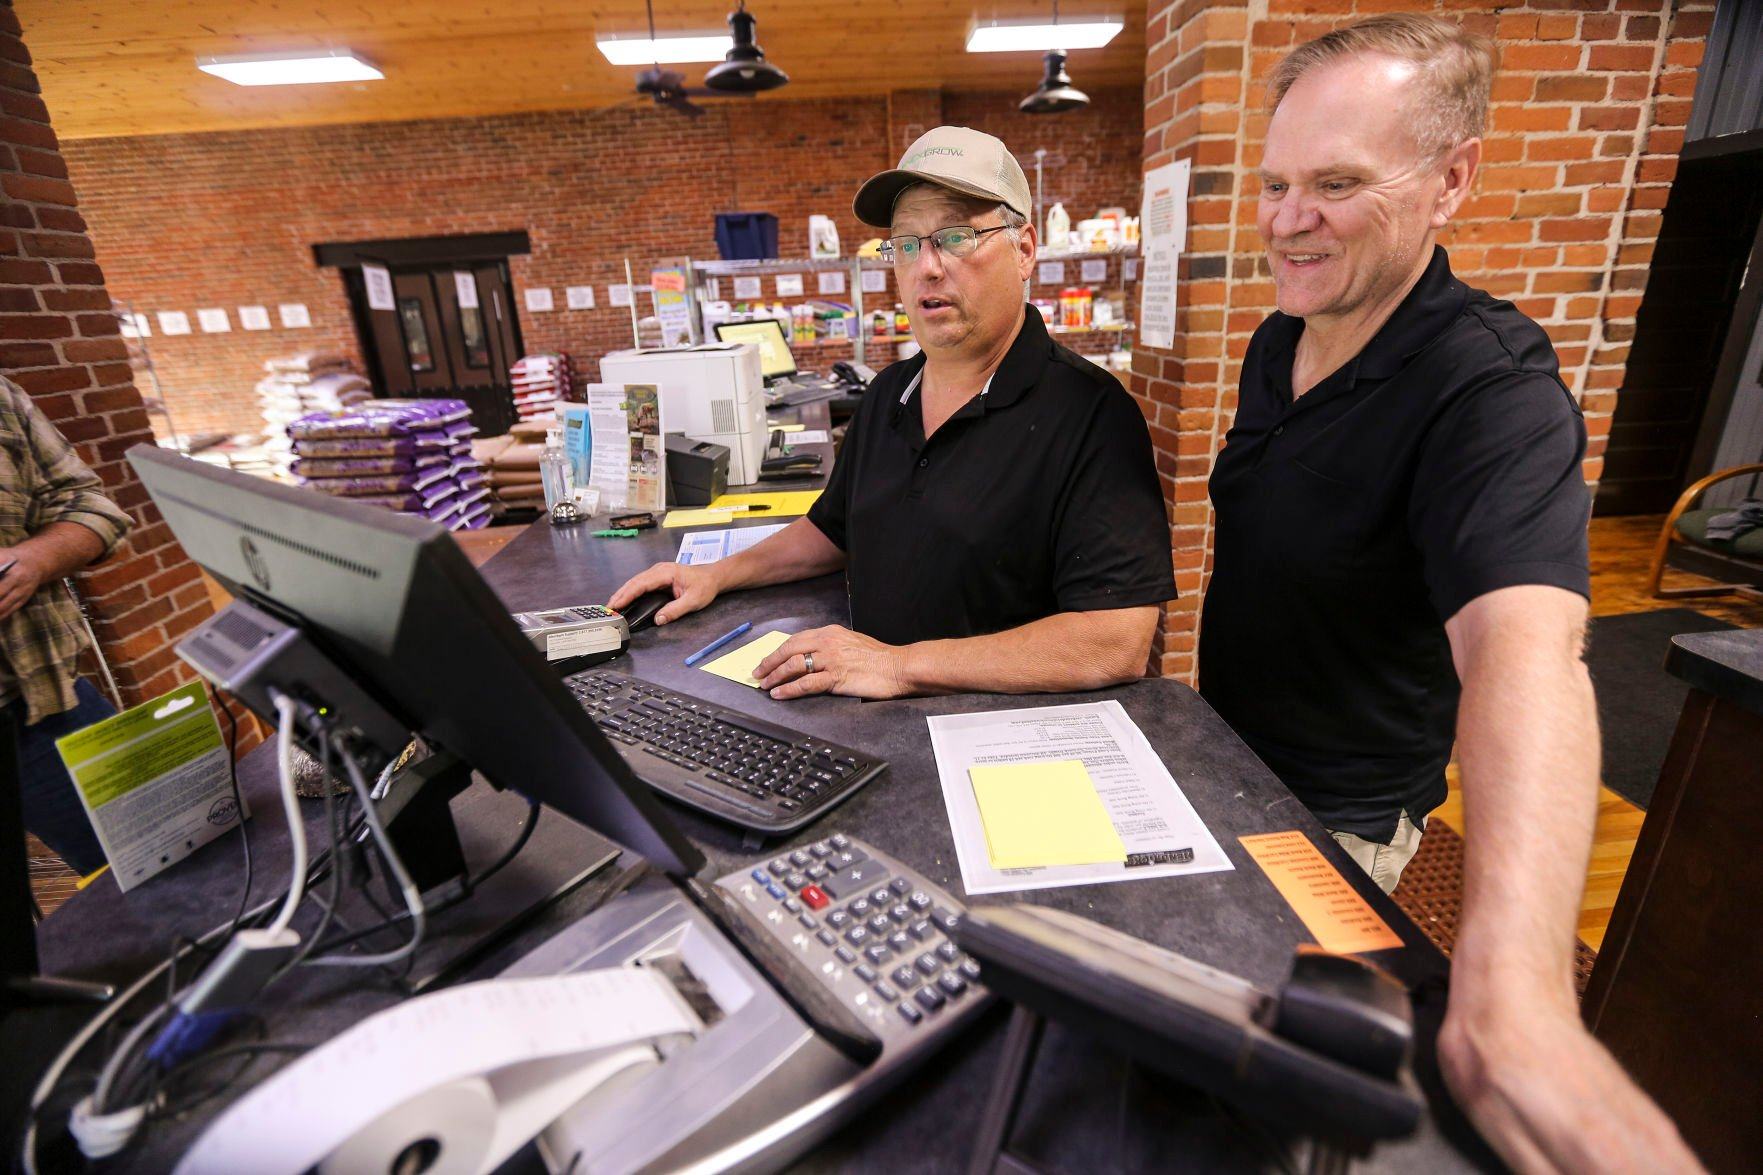 The longtime owner of Hendricks Feed & Seed Co., Bill Hendricks (right), works with new owner Rodney Schroeder at the front desk of the Dubuque business on Wednesday.    PHOTO CREDIT: Dave Kettering